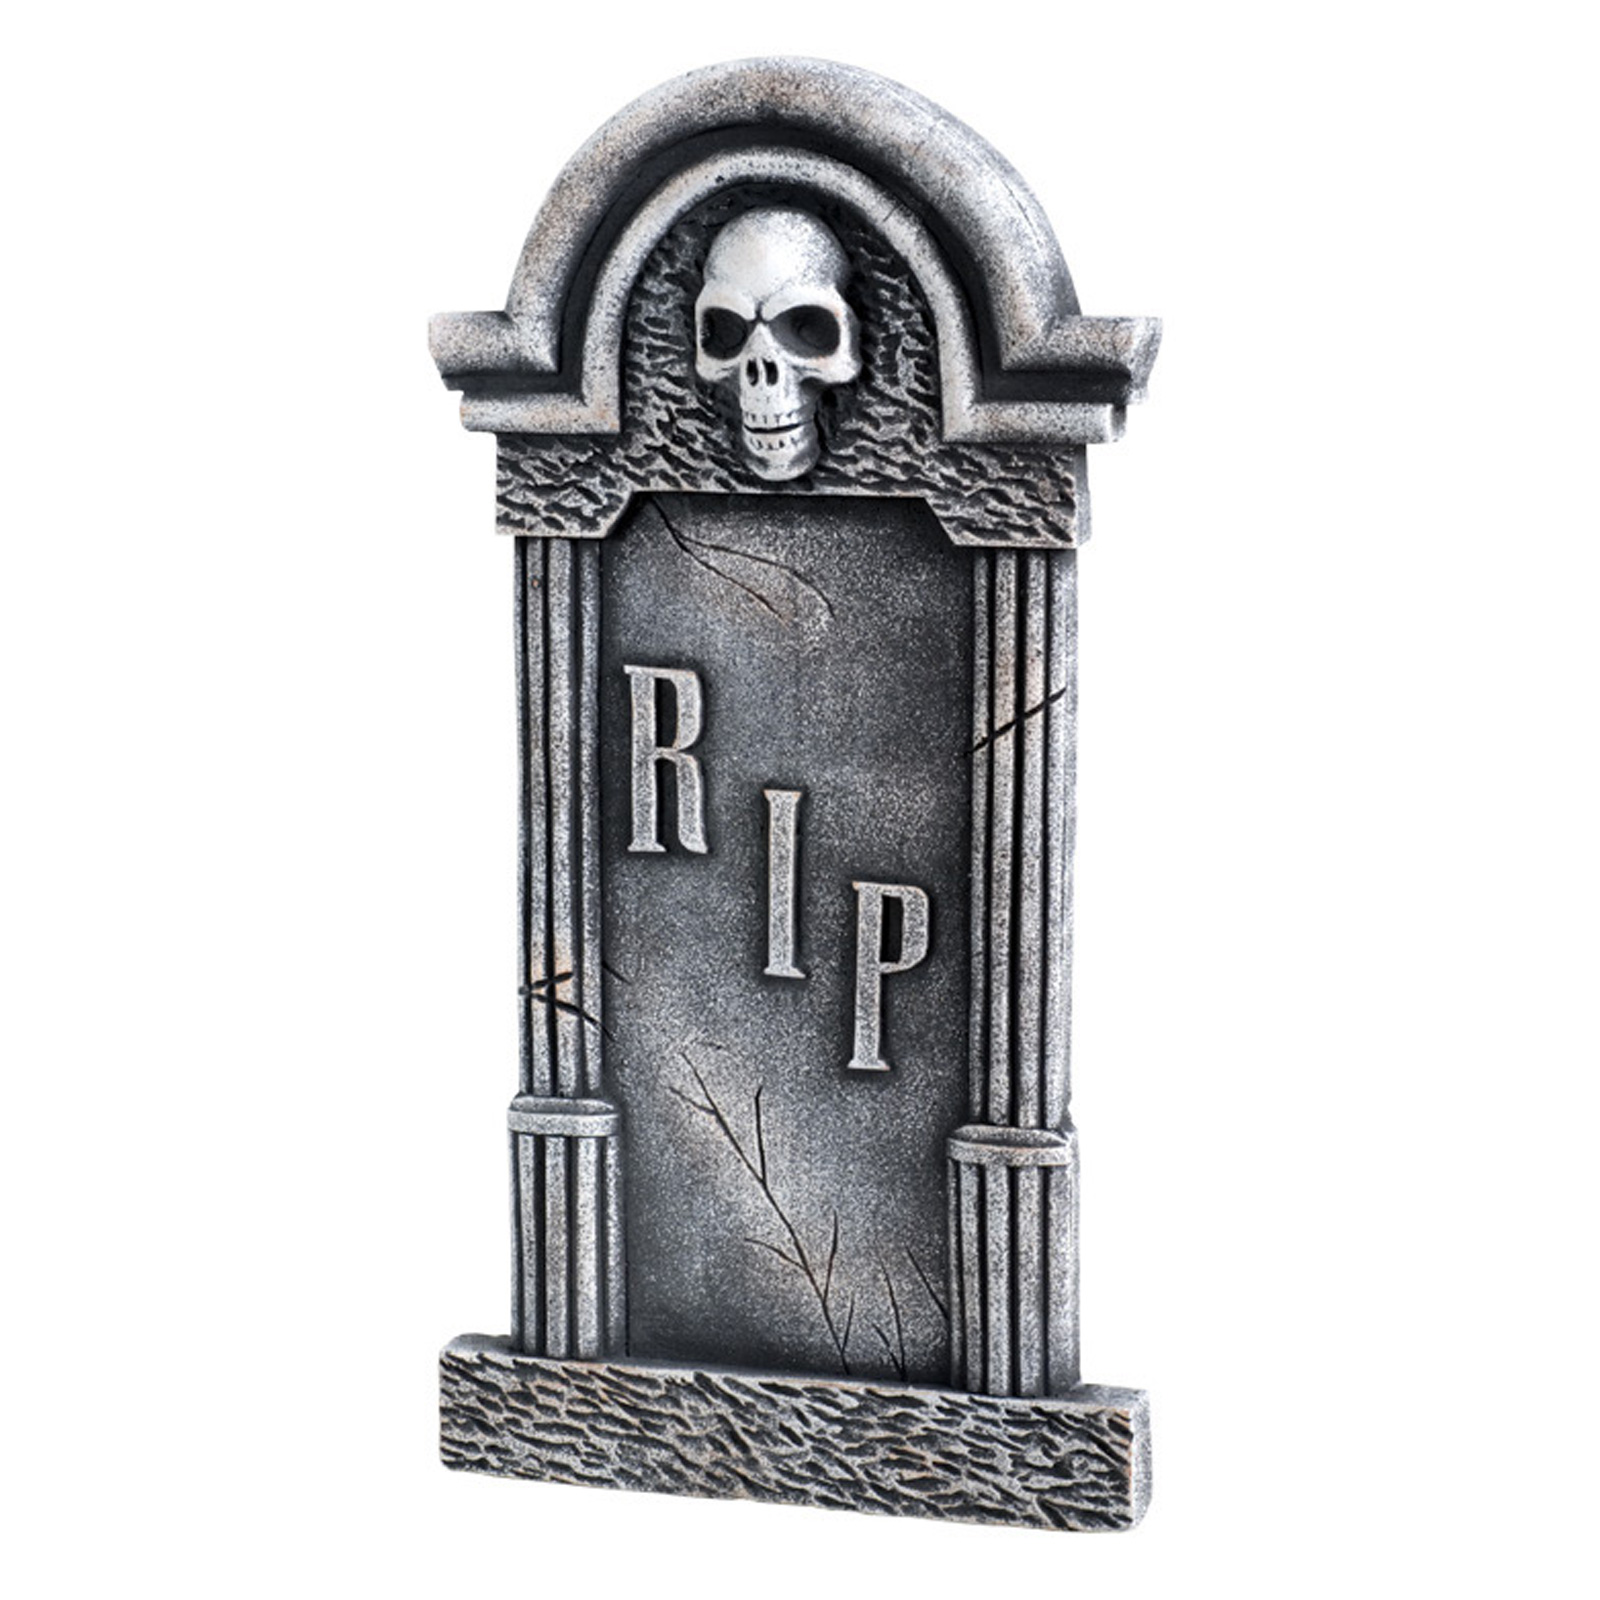 Tombstones - RIP with Skull | ThePartyWorks